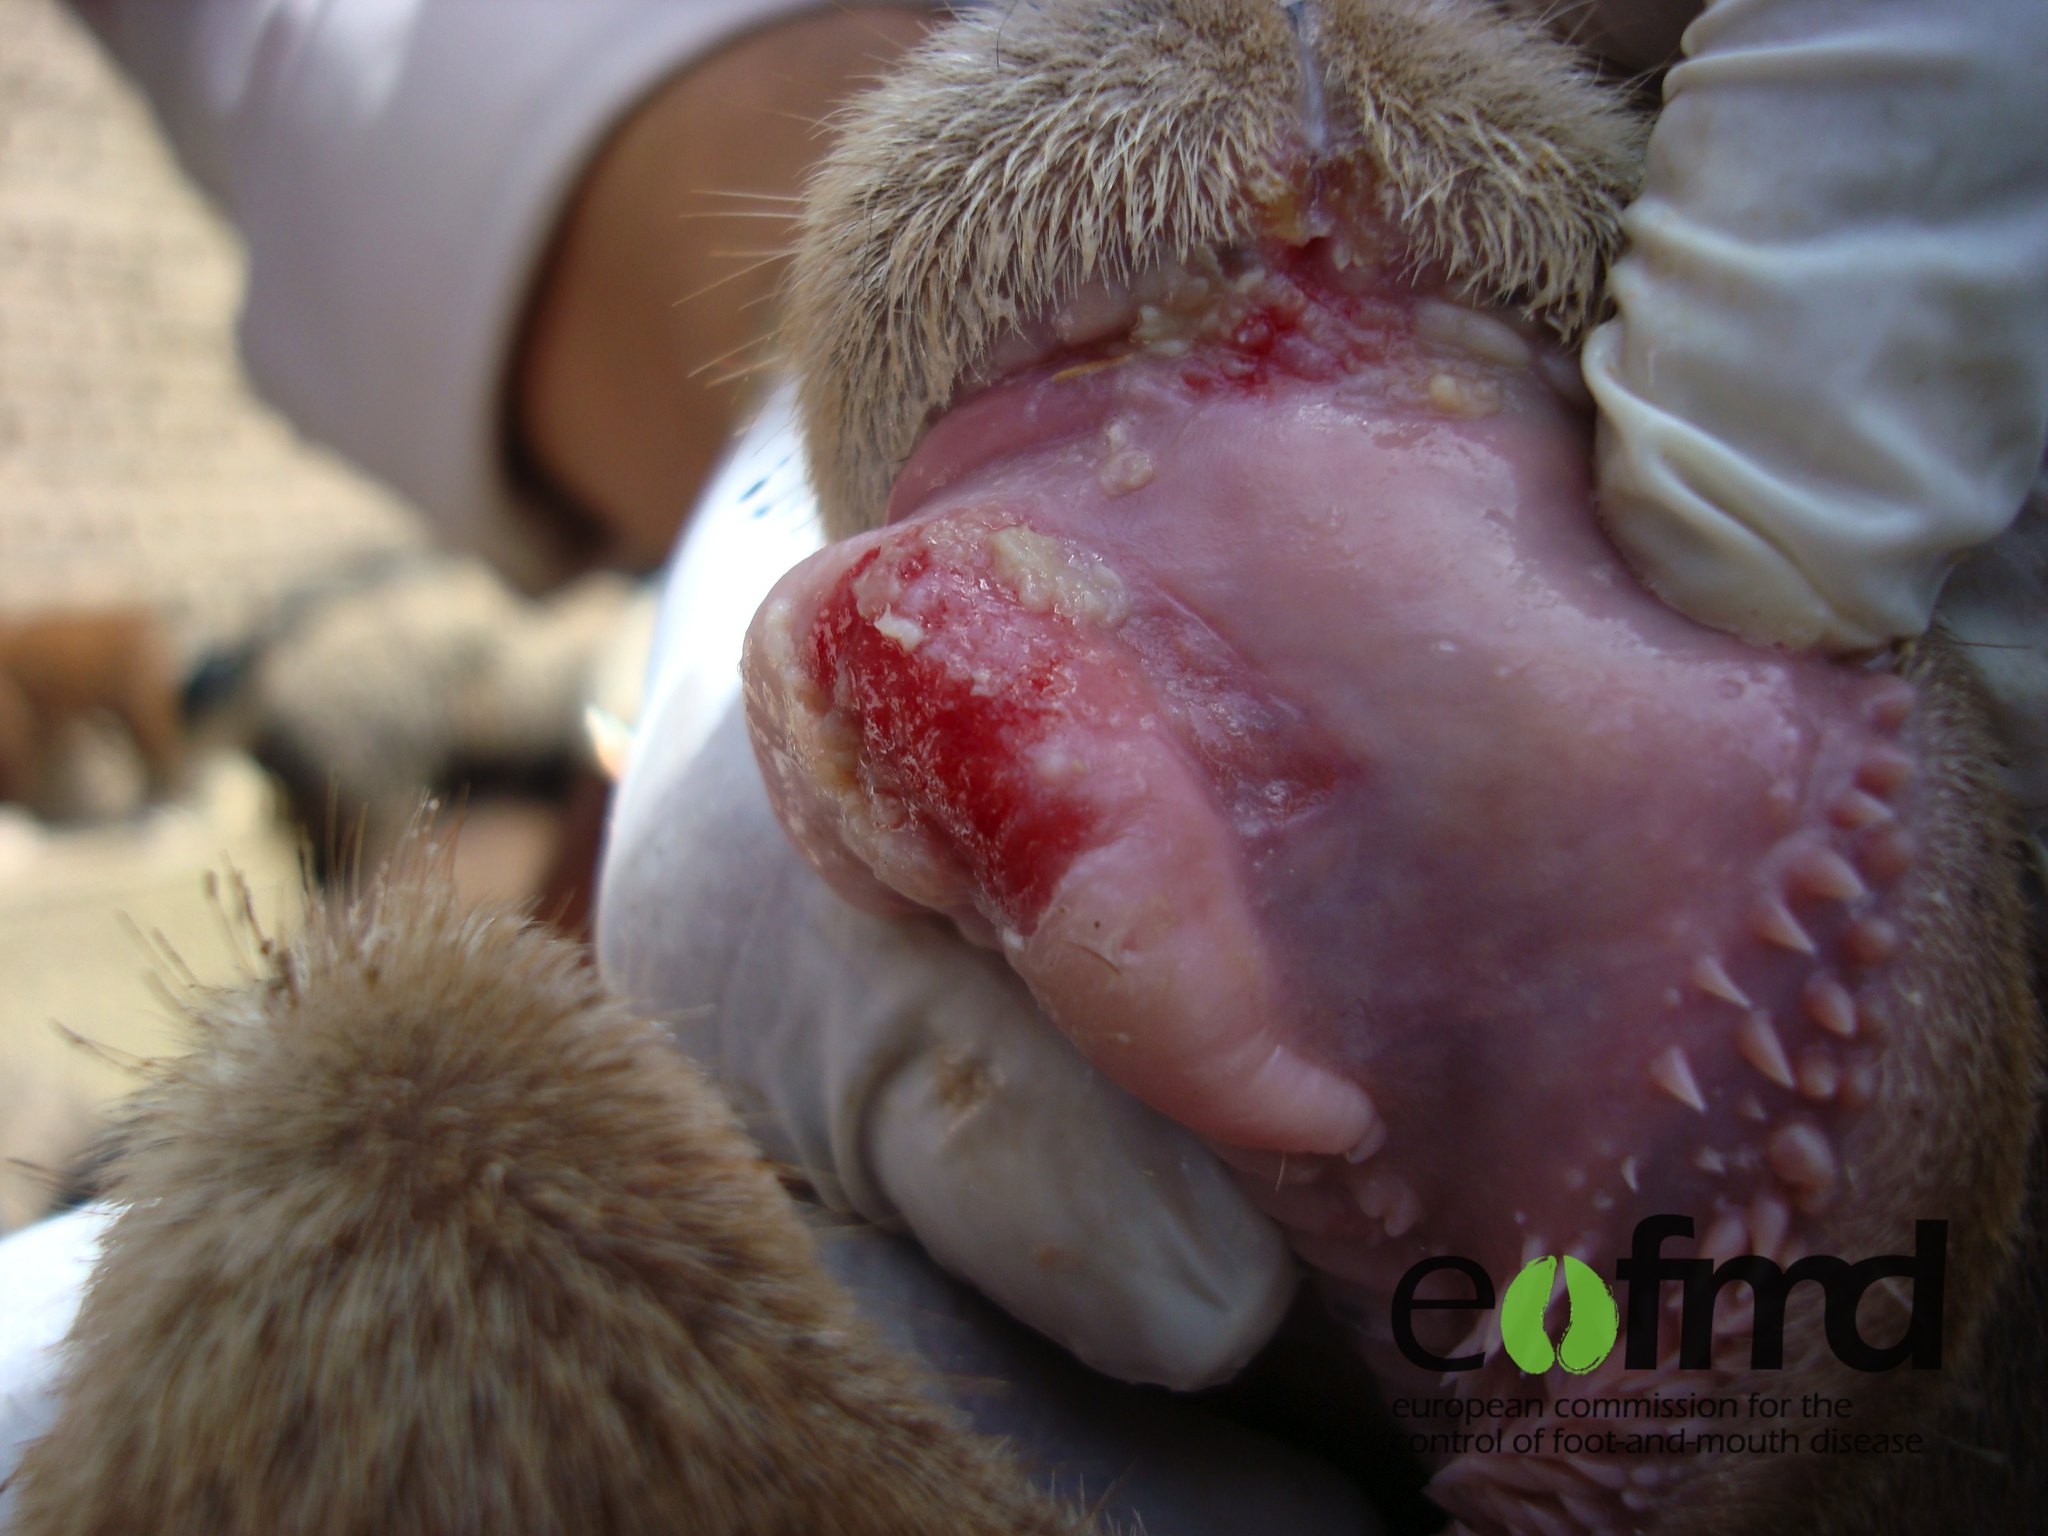 Foot-and-mouth-disease blisters on a sheep